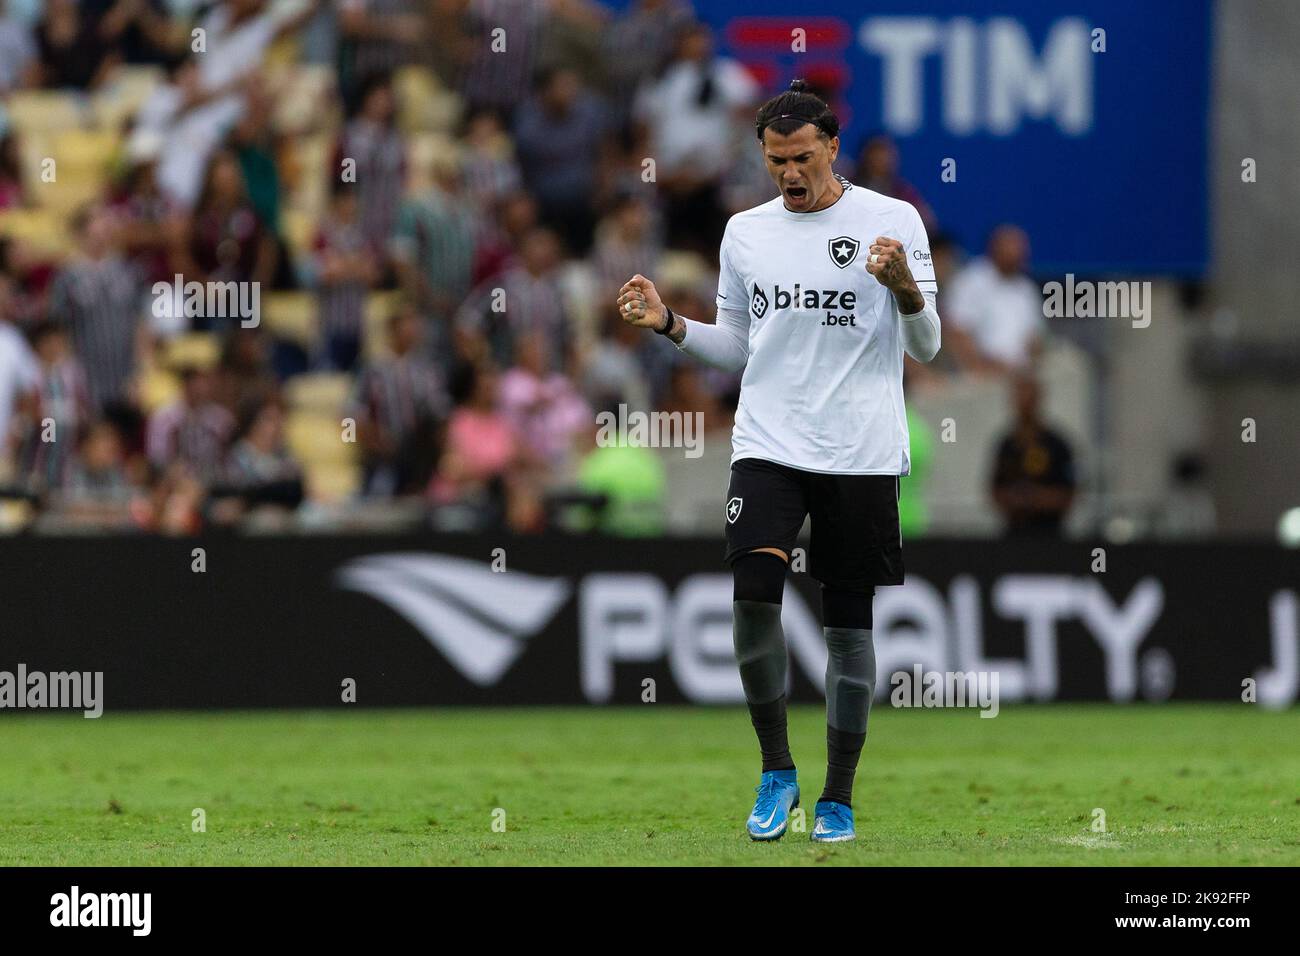 Rio de Janeiro, Brazil. June 08, 2022, Ademir of Atletico-MG during the  match between Fluminense and Atletico-MG as part of Brasileirao Serie A  2022 at Maracana Stadium on June 08, 2022 in